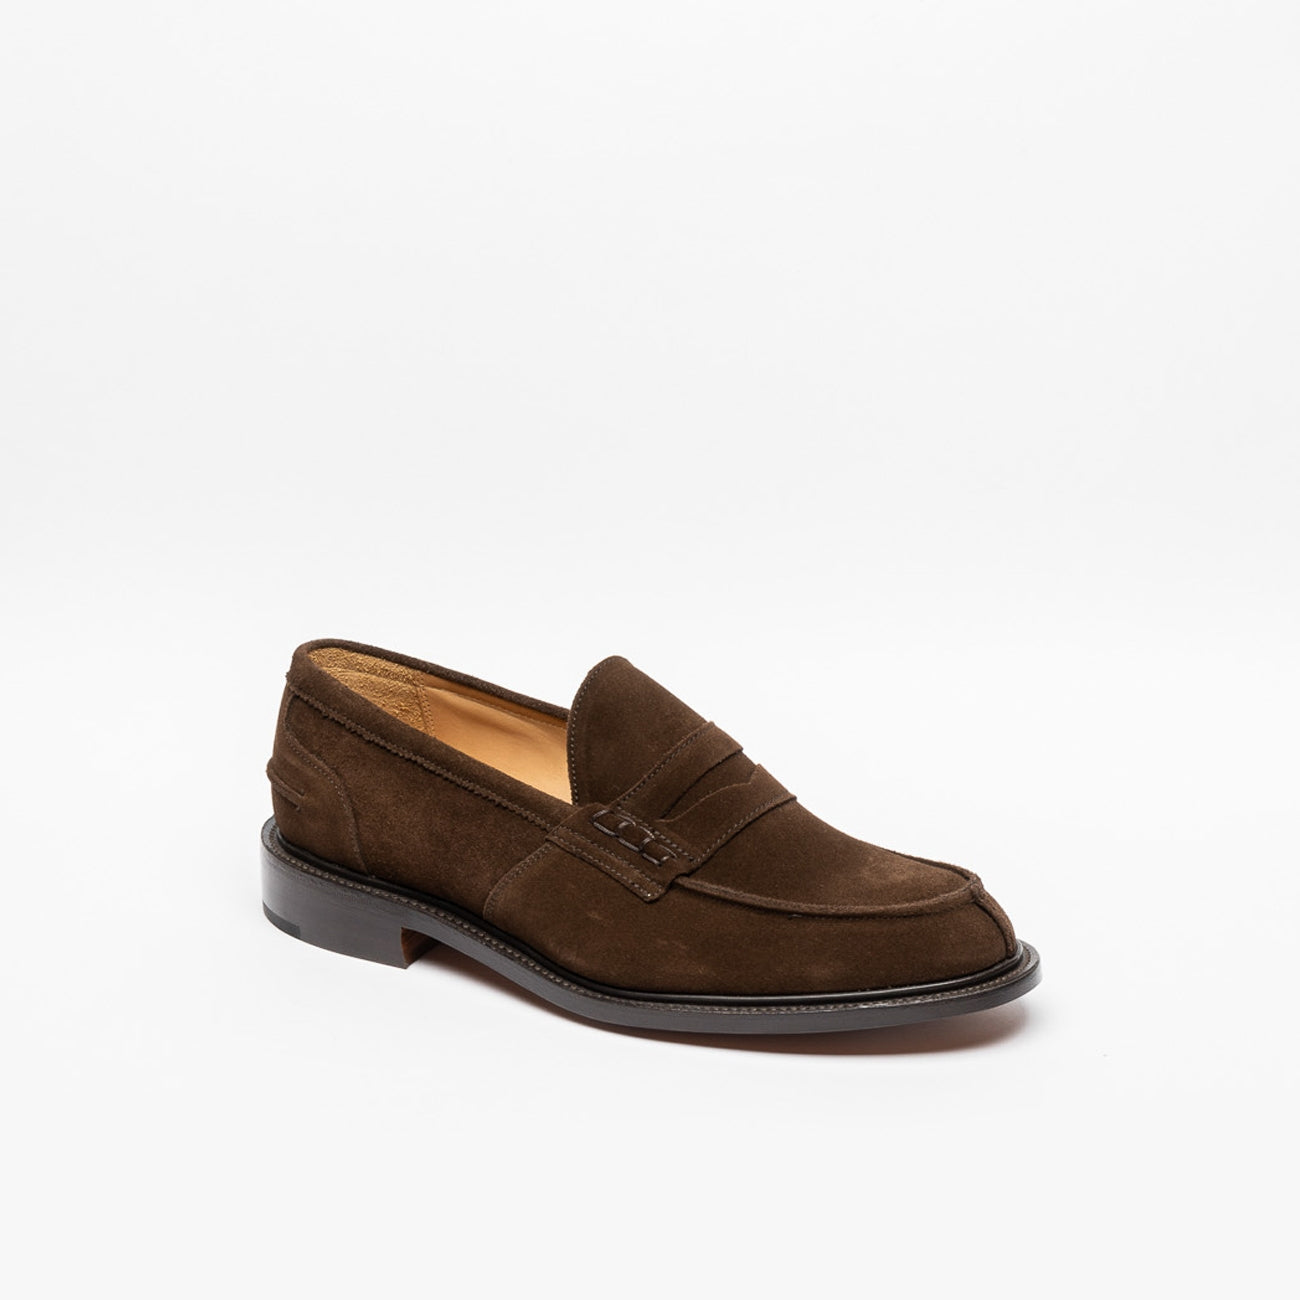 Tricker's chocolate repello suede loafer